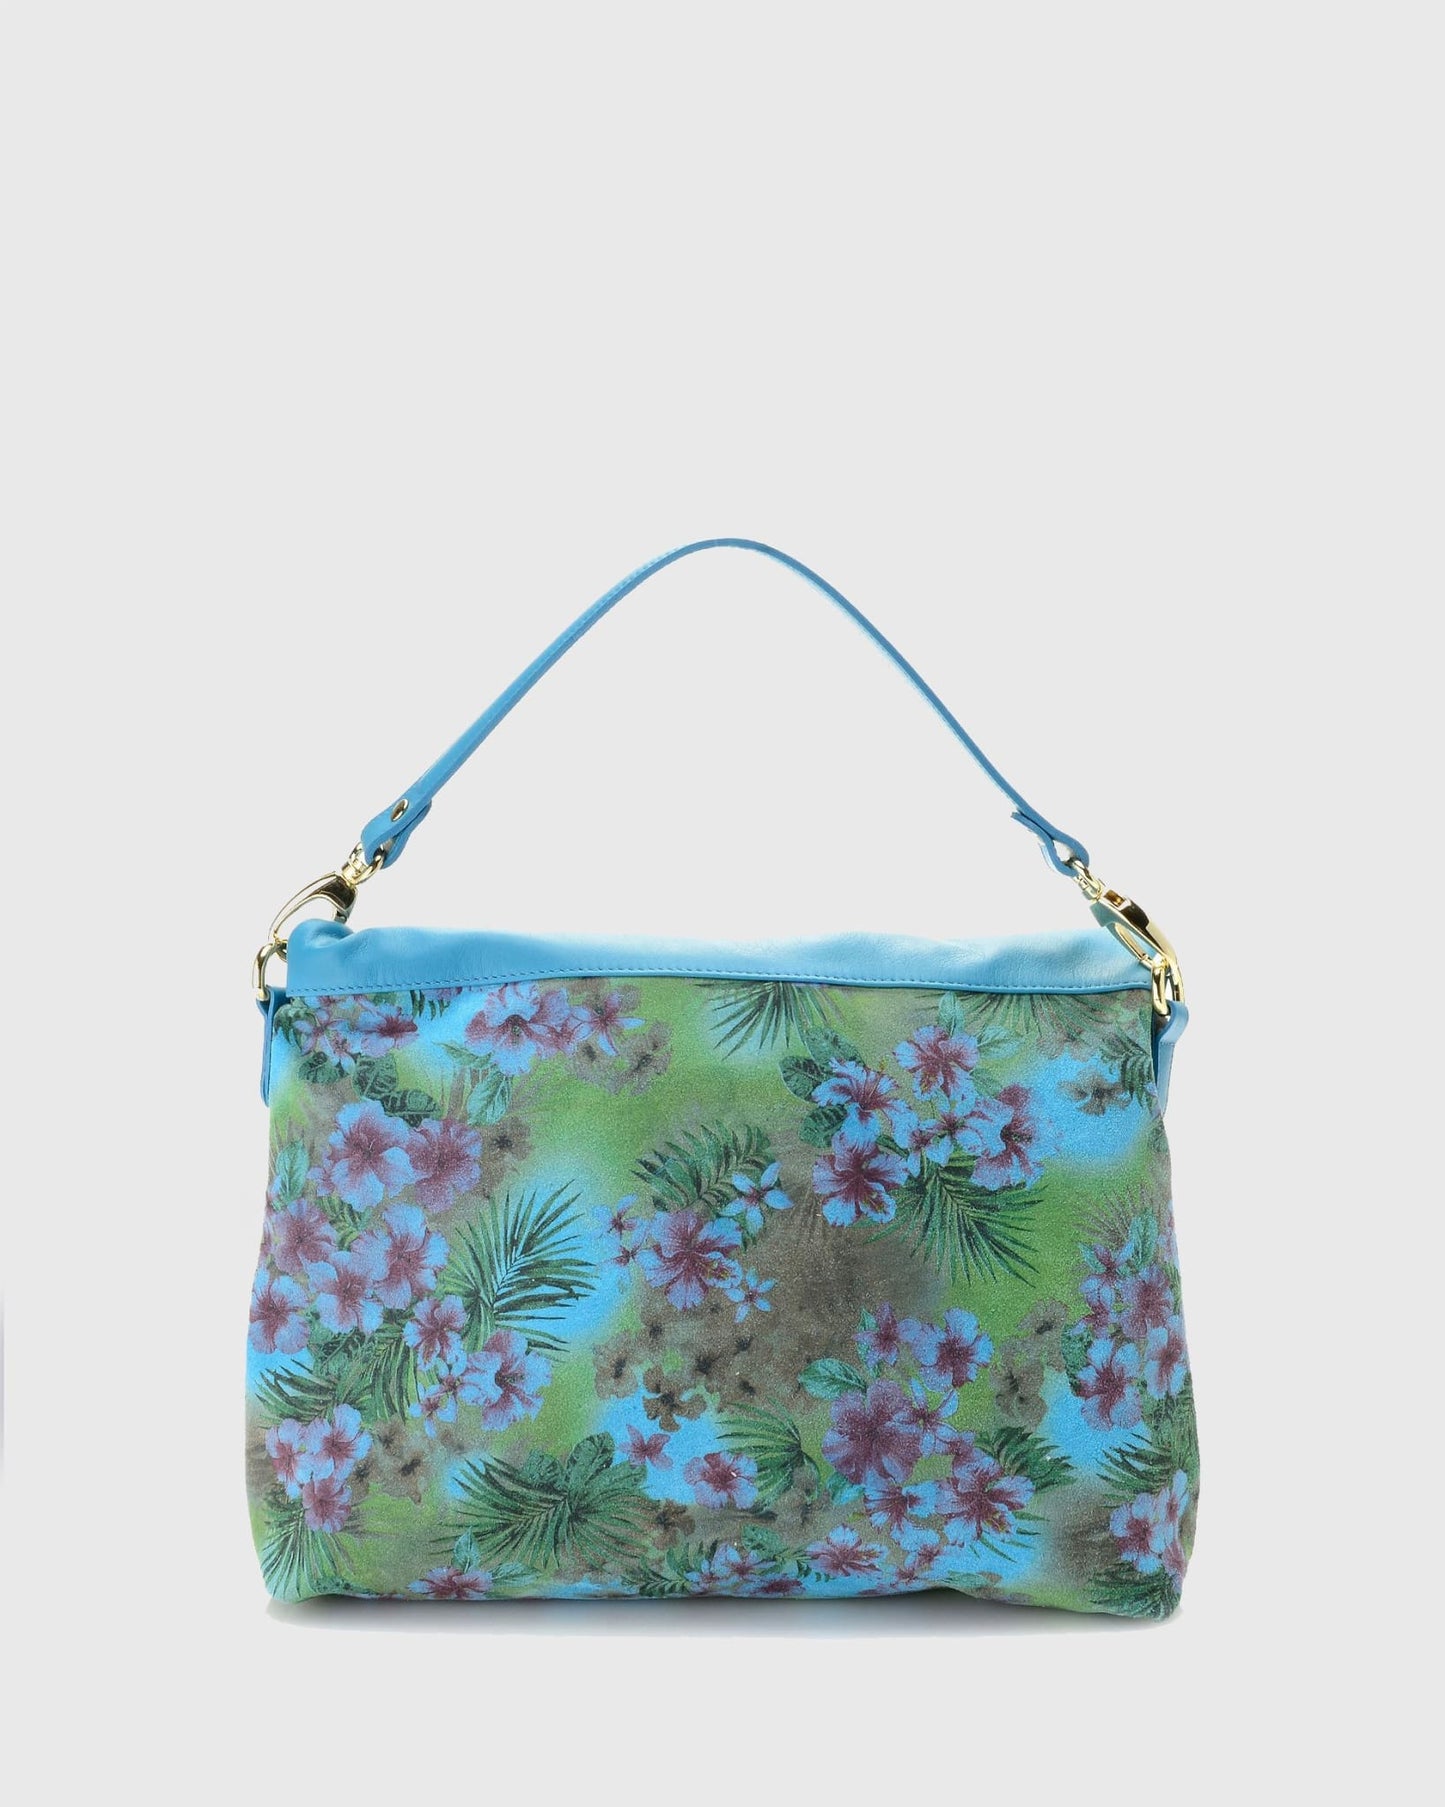 Kaylee - Blue Floral Bags | Pietro NYC